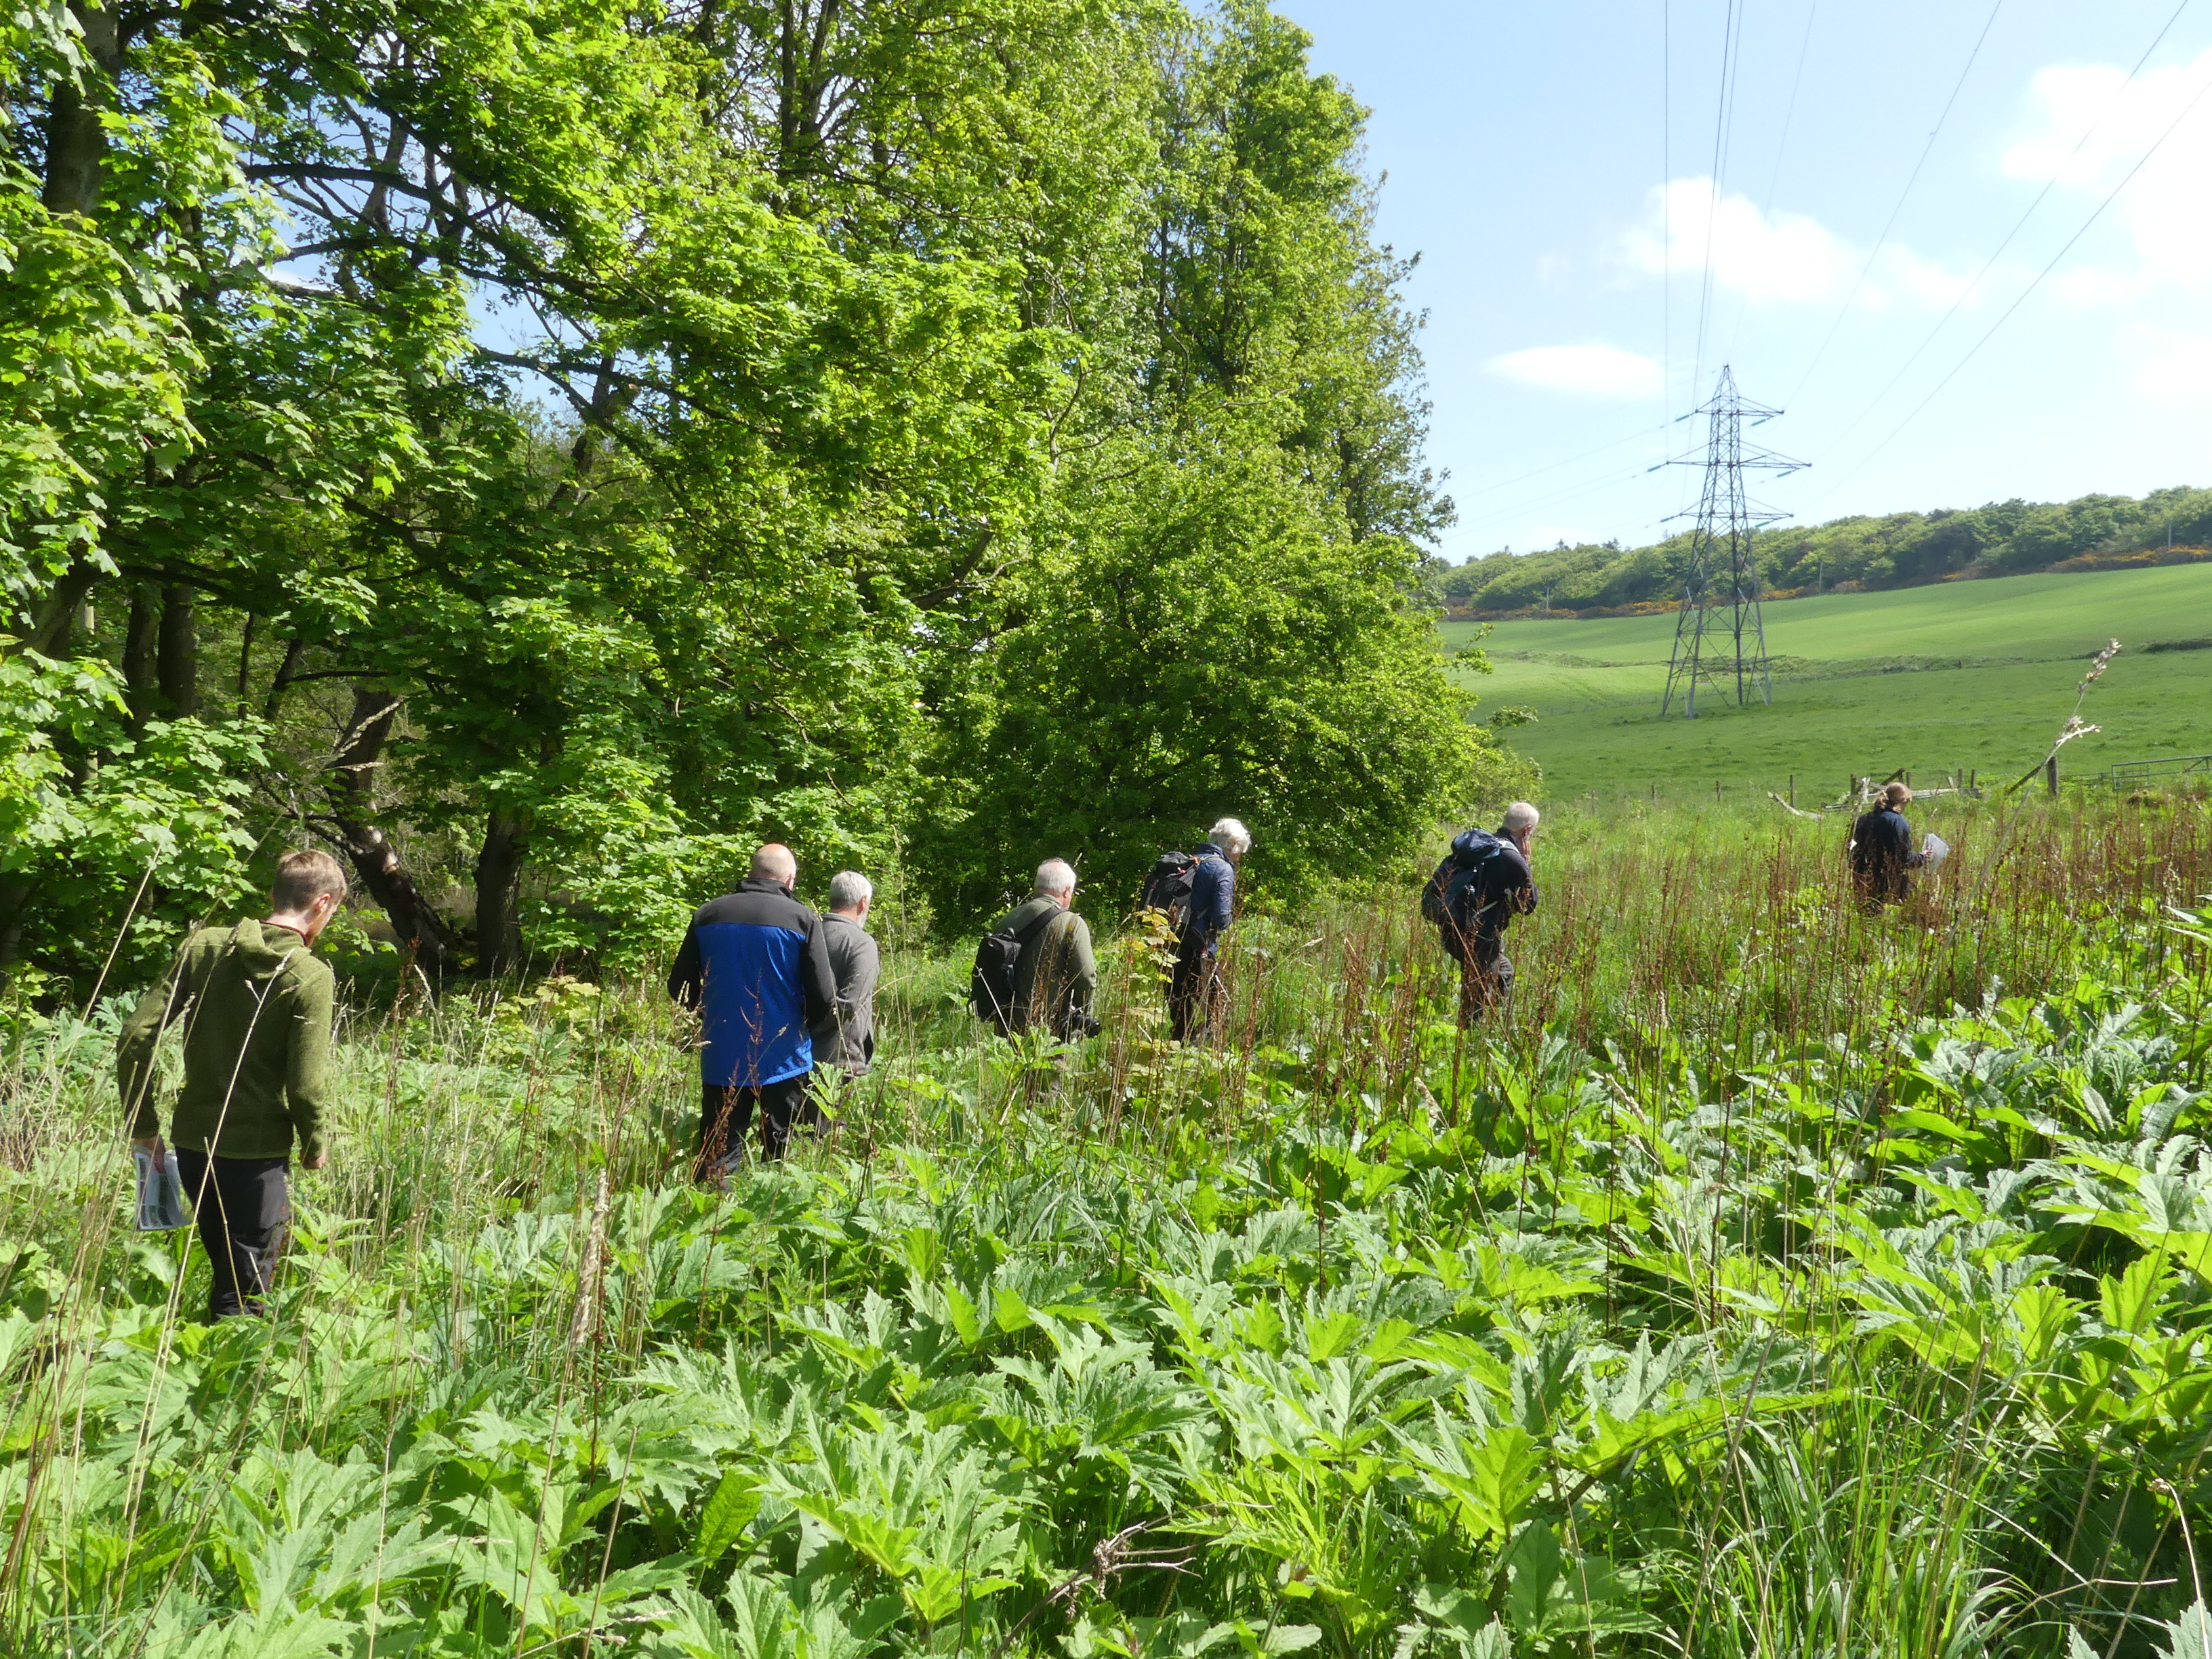 Group of people walking through the Macduff trial site